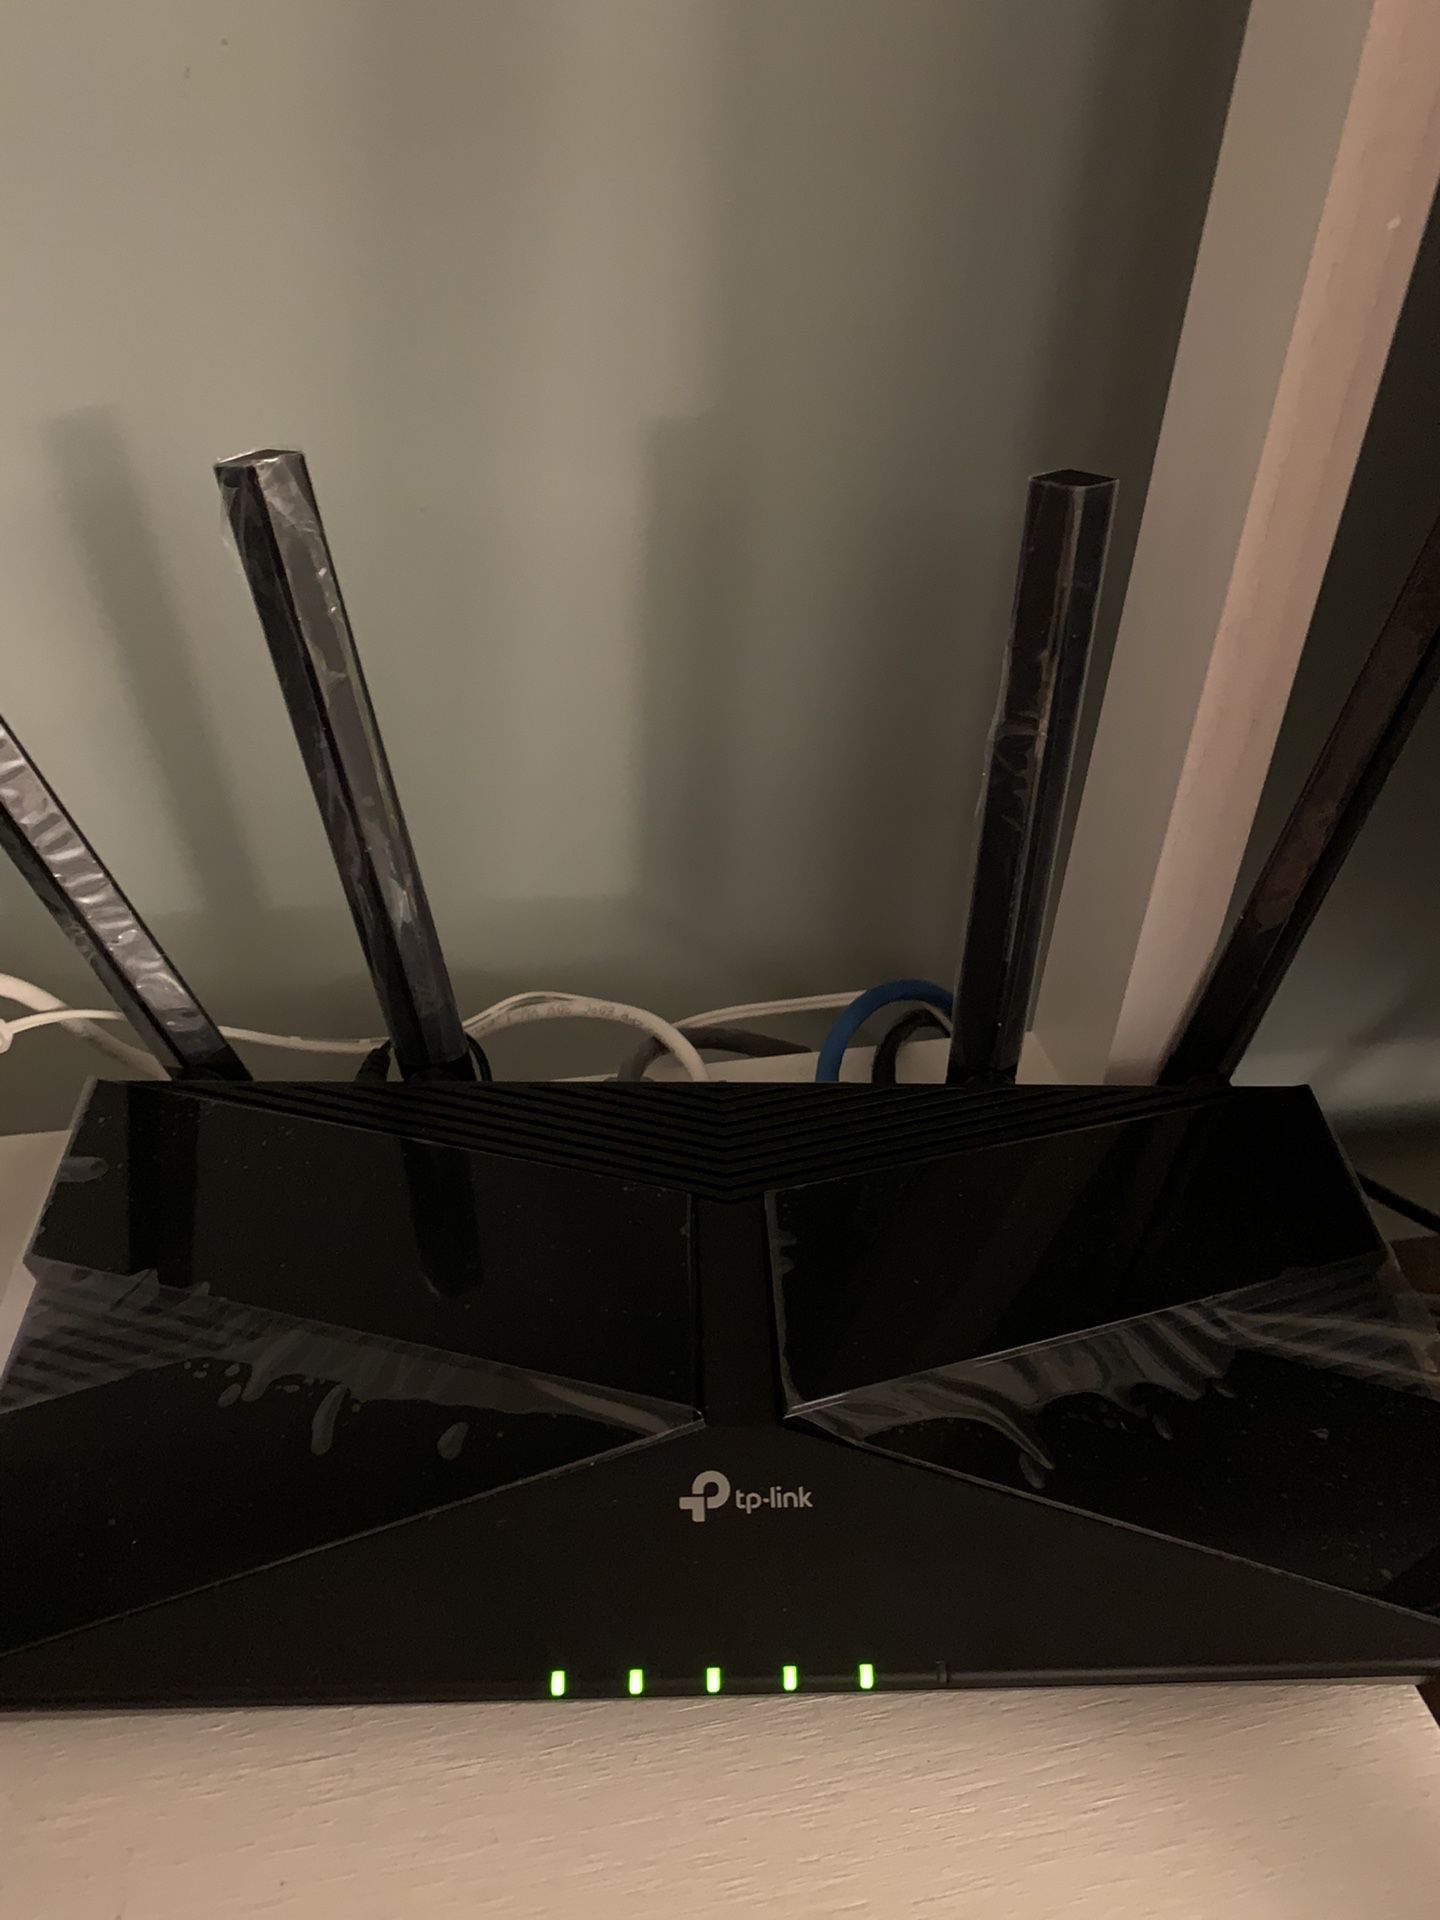 AX10 AX1500 WiFi 6 TP Link router